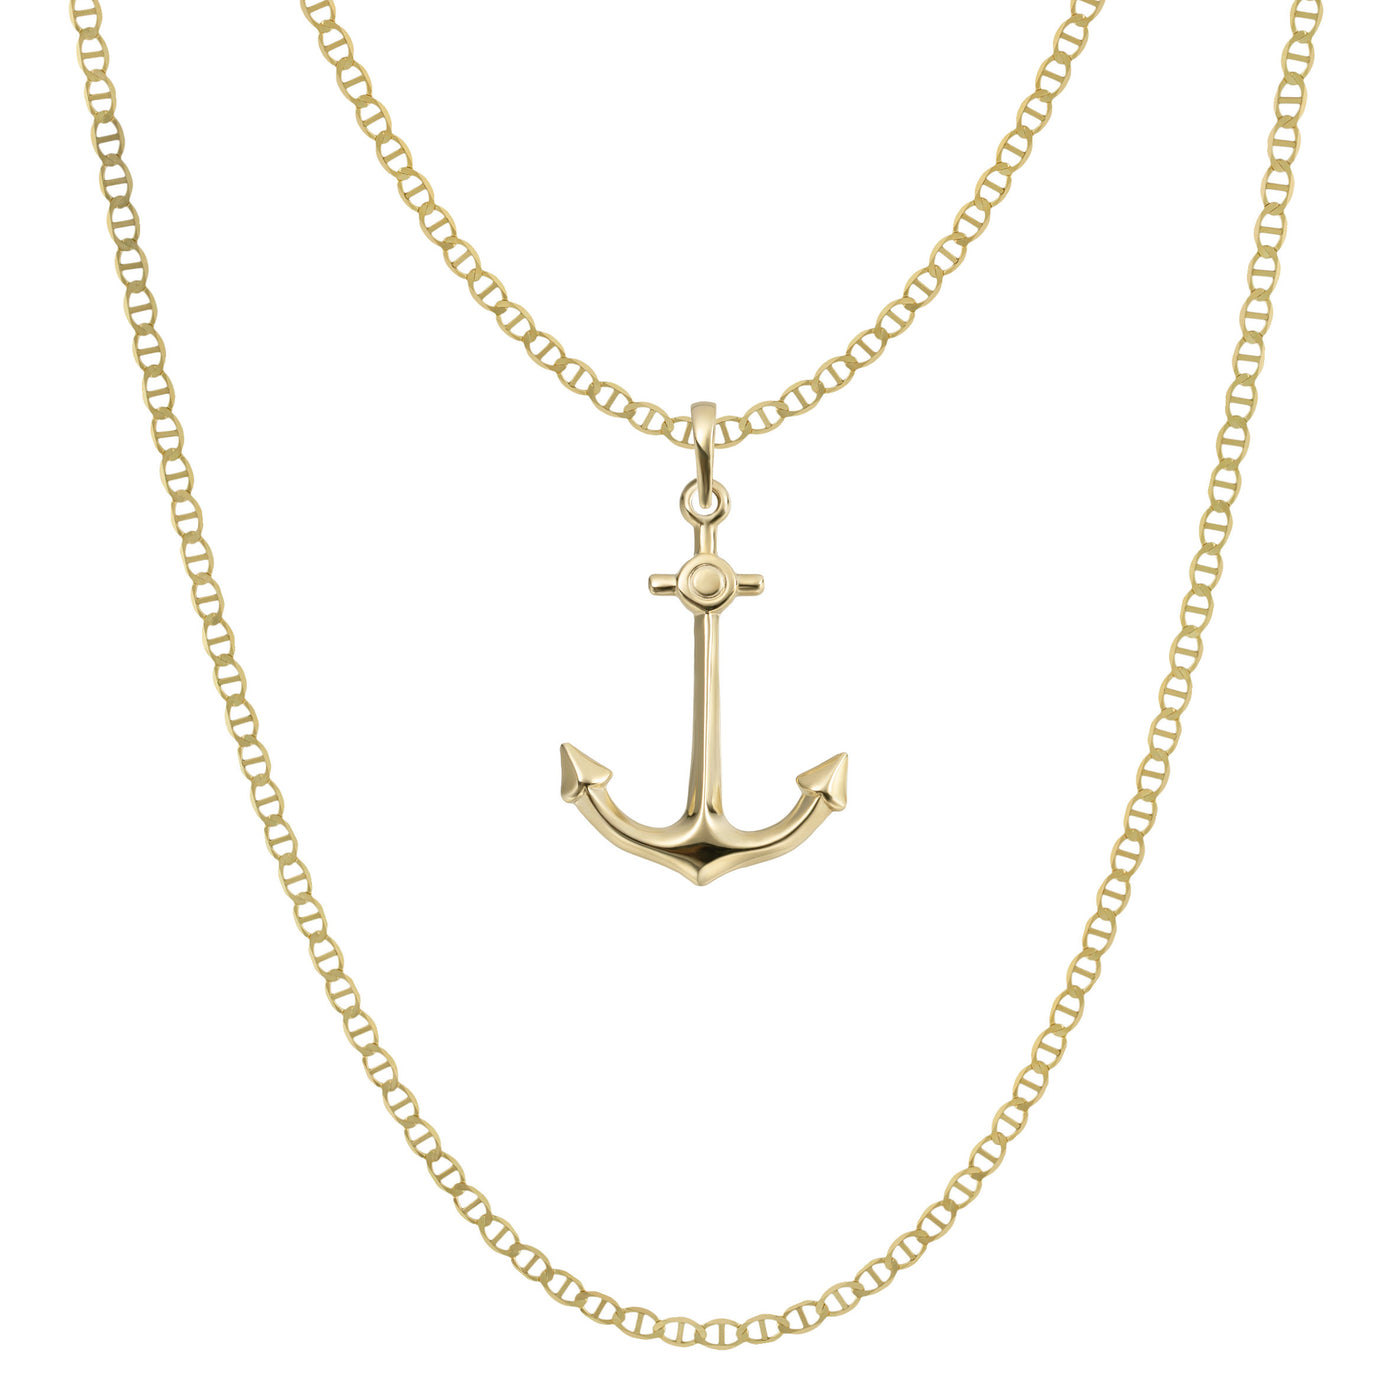 1 1/2" Anchor Pendant & Chain Necklace Set 10K Yellow Gold